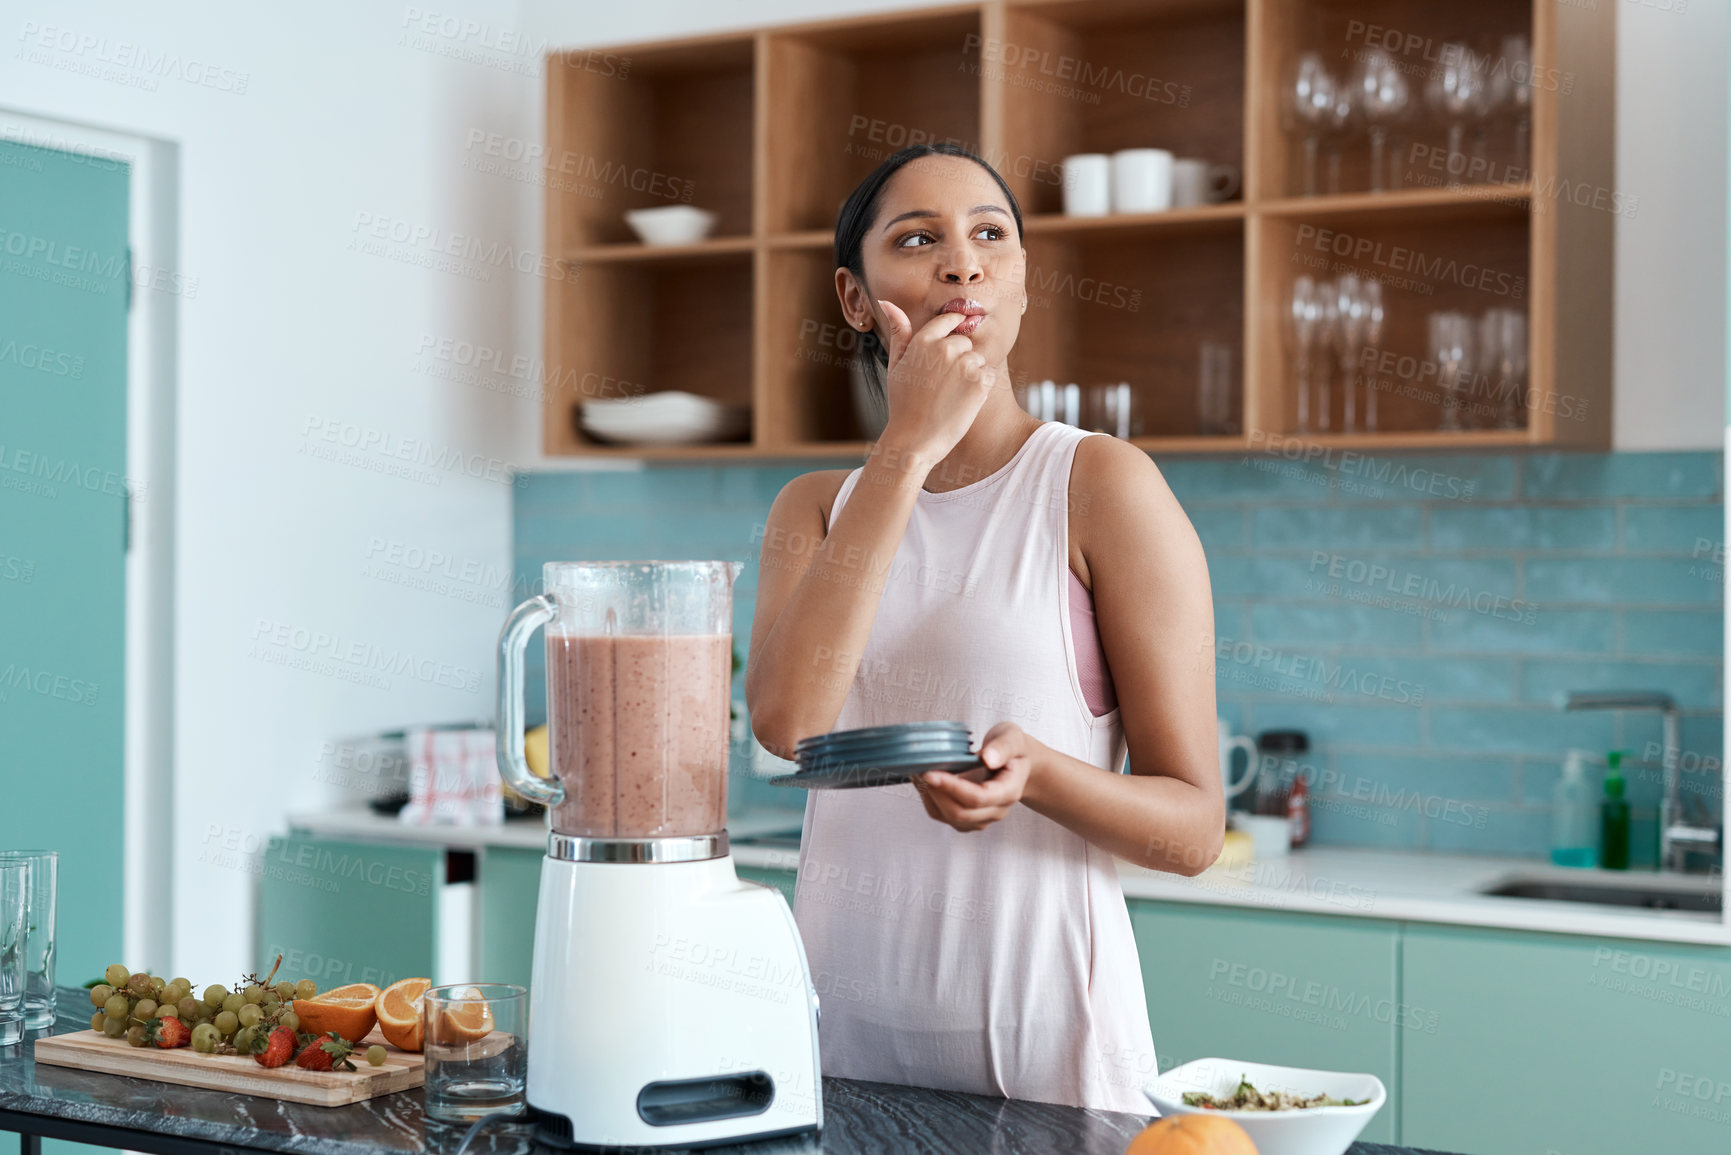 Buy stock photo Cropped shot of an attractive young woman making smoothies in her kitchen at home